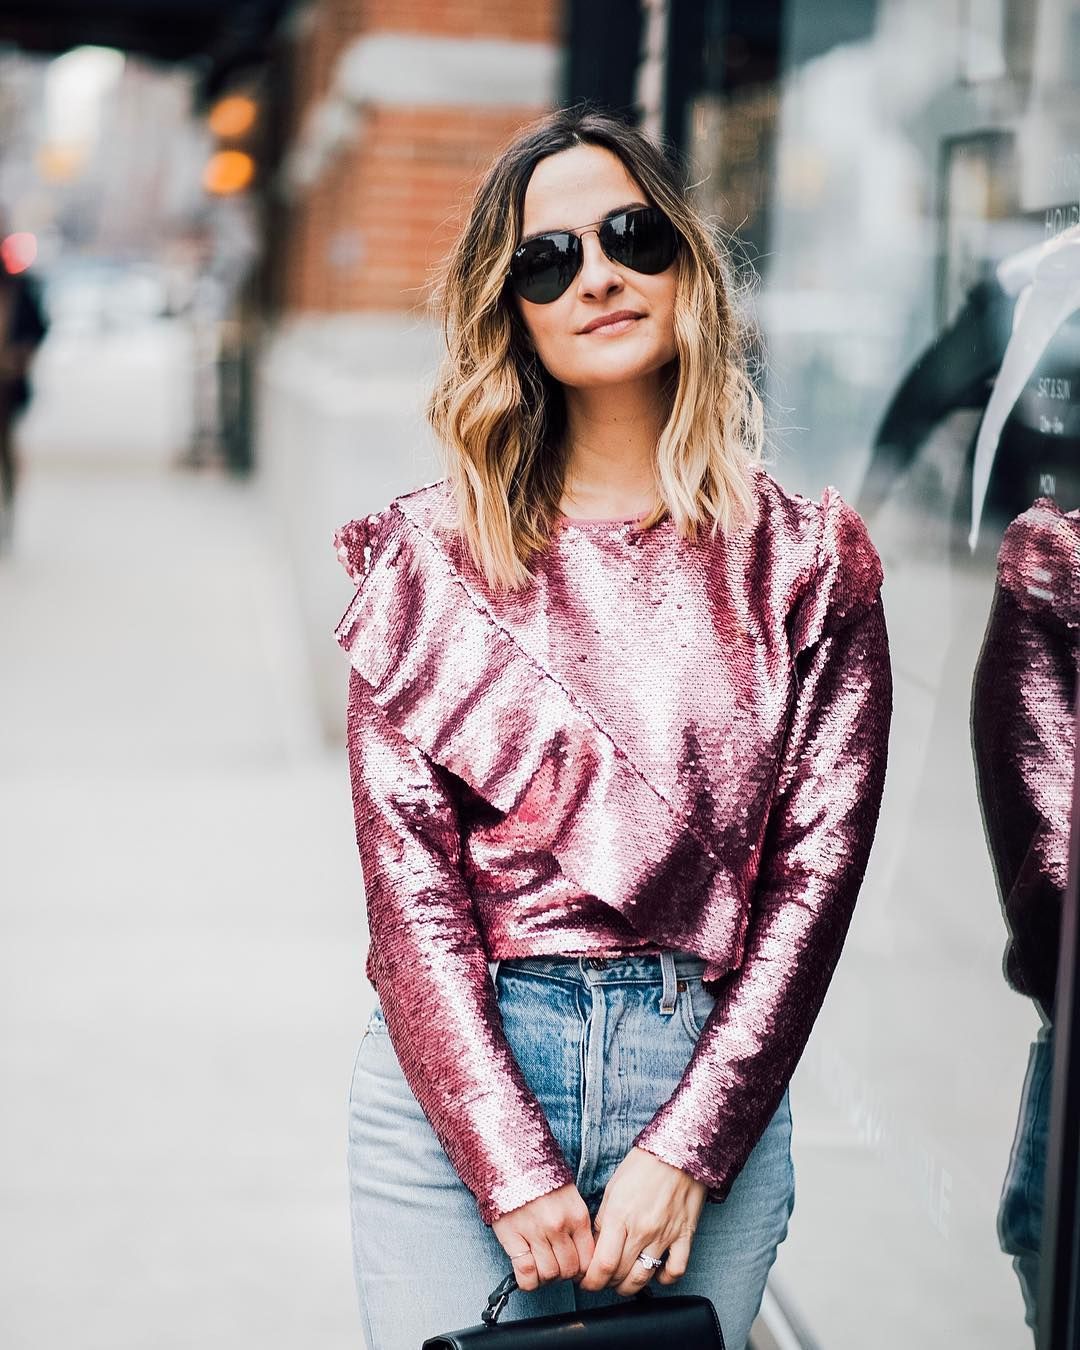 Metallic Top Chic Outfit Ideas